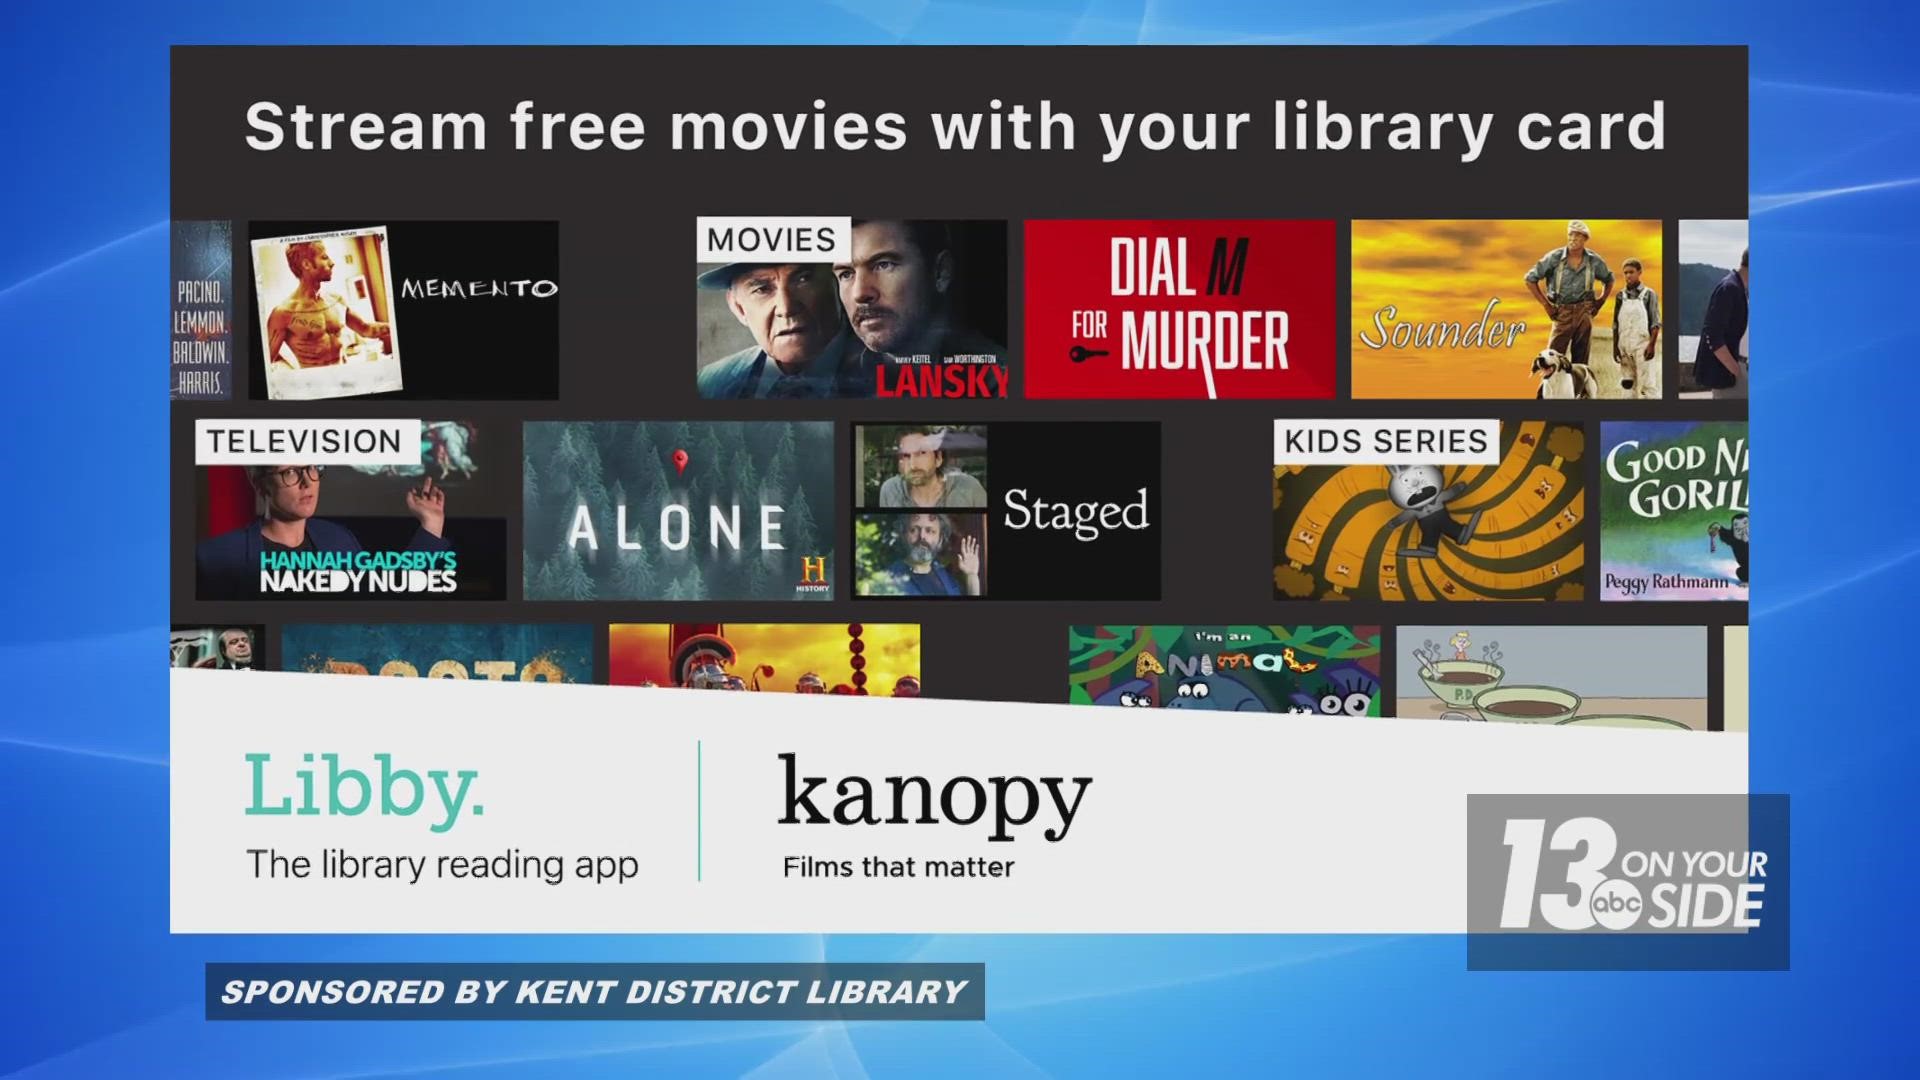 Kanopy’s selection offers something for everyone, from award-winning indie films and documentaries, to foreign films, popular cinema, children’s shows and more.